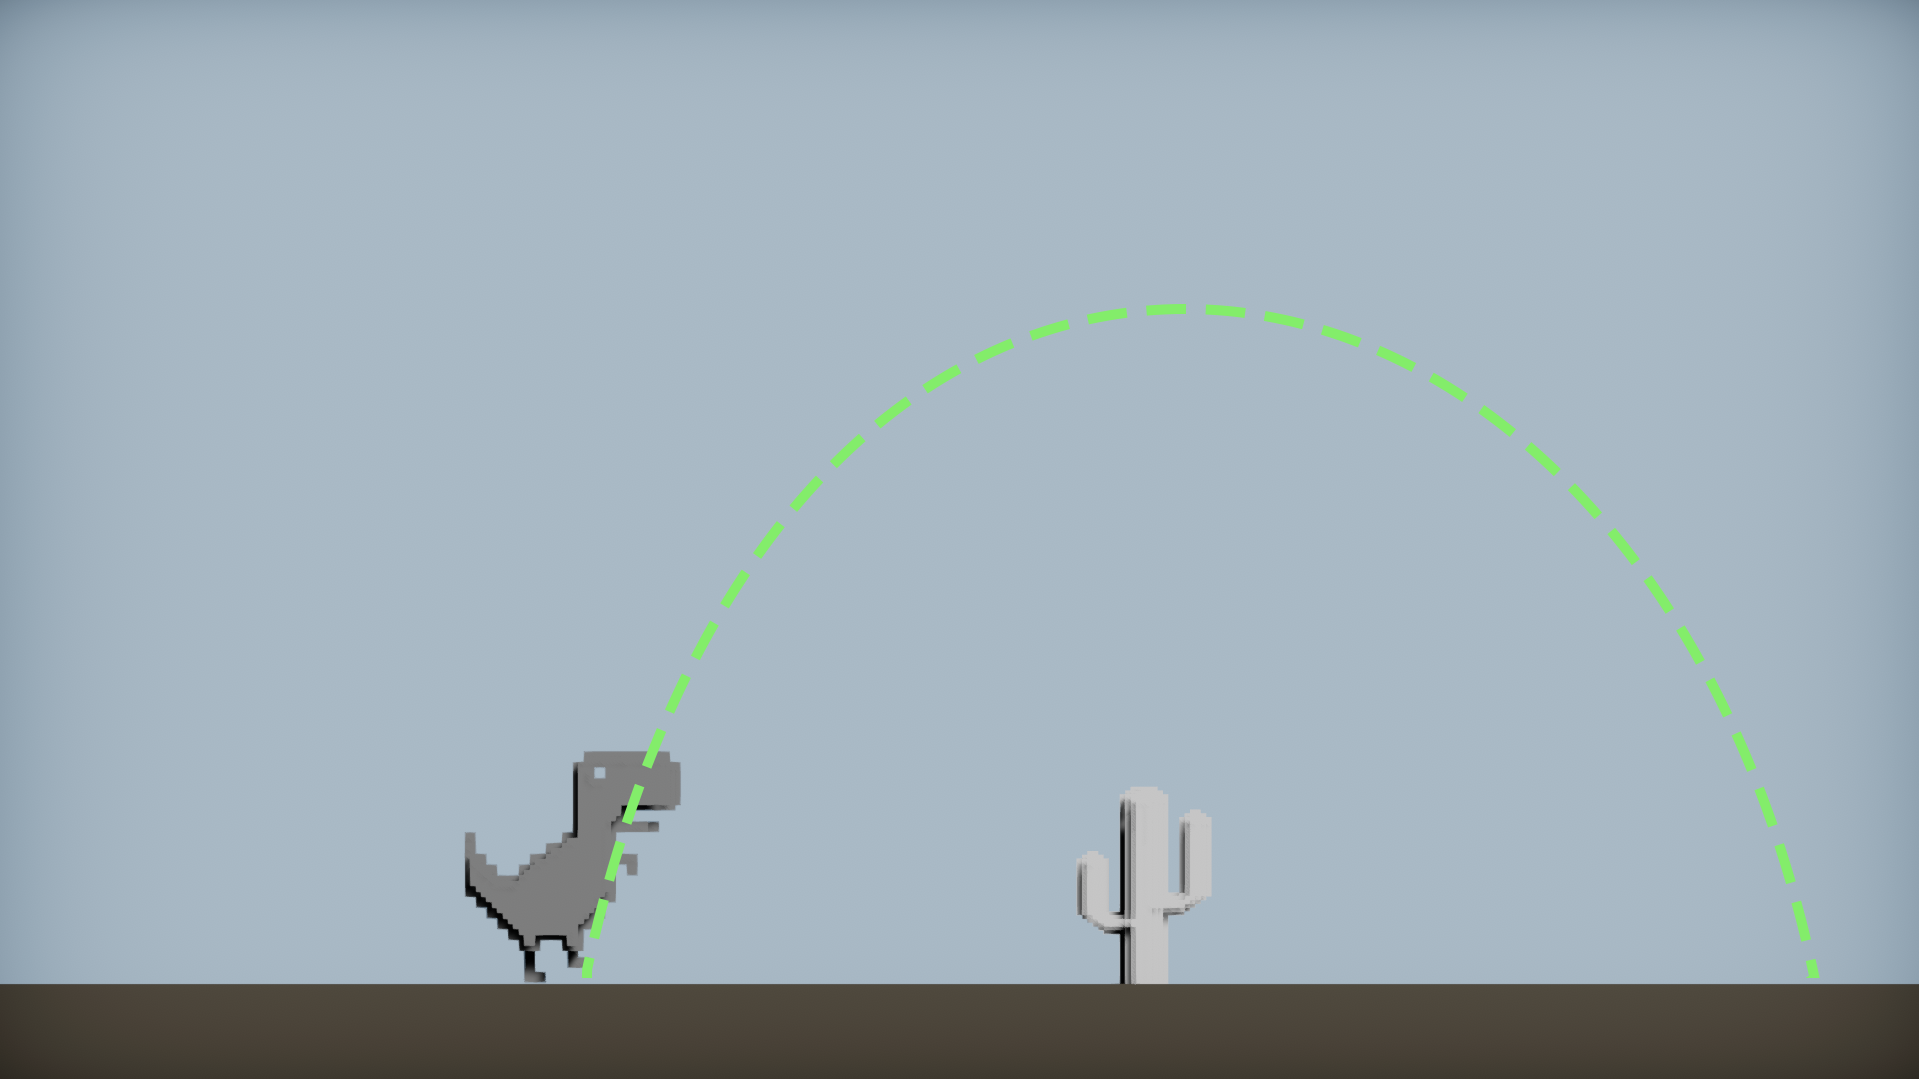 How to change the character in the dinosaur Chrome game?